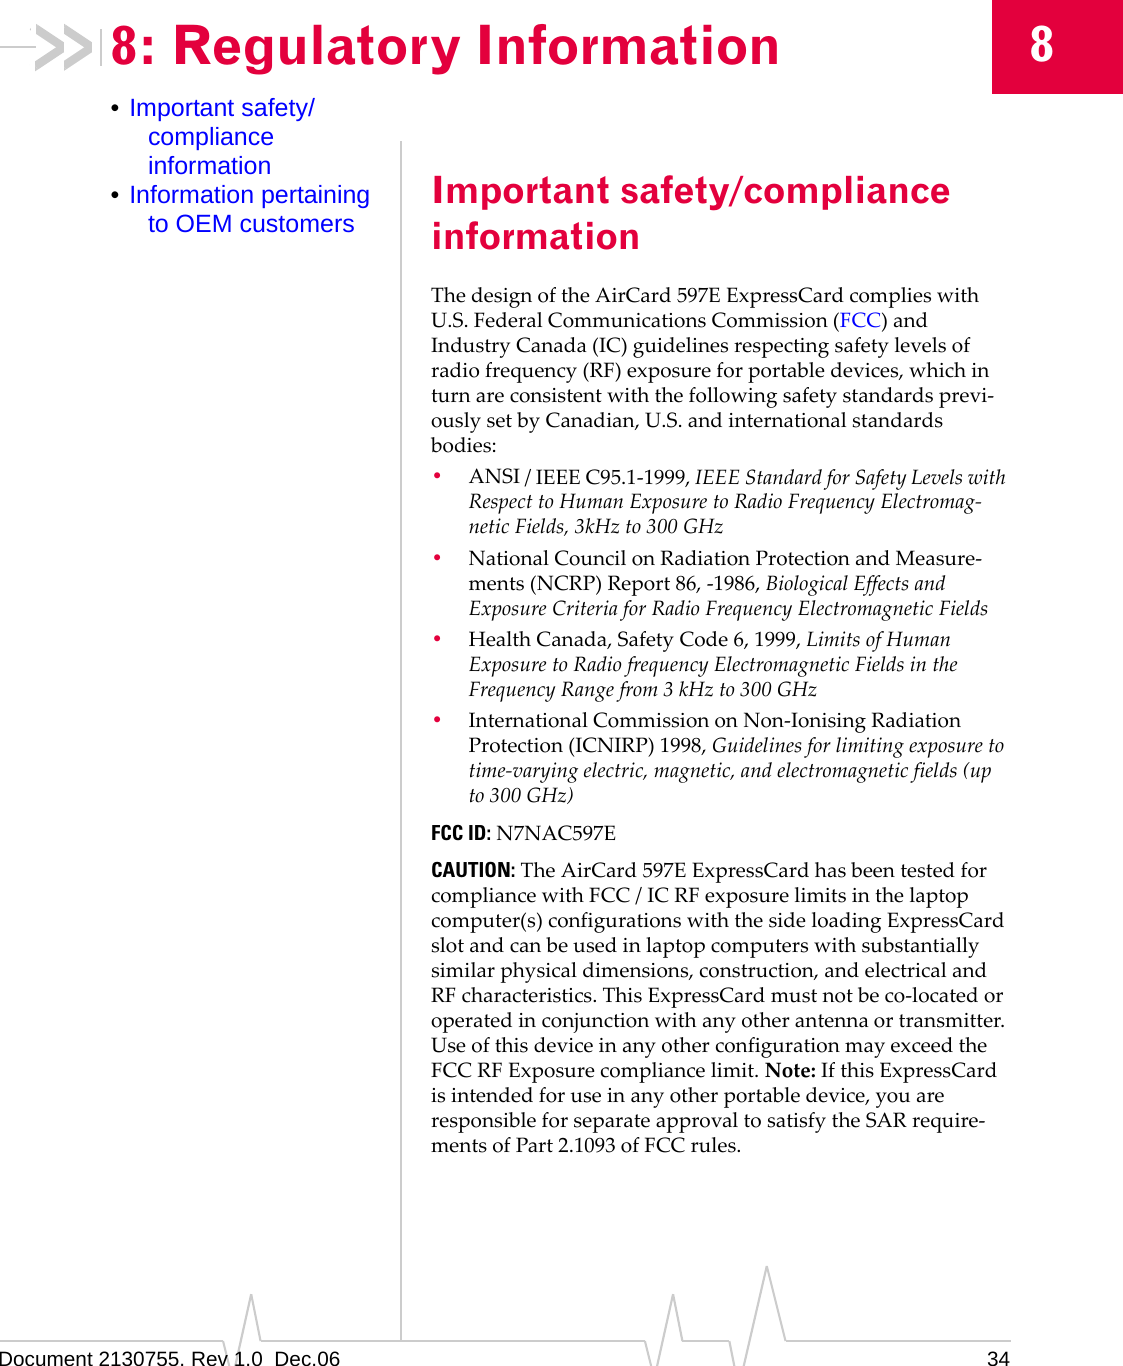 Document 2130755. Rev 1.0  Dec.06 3488: Regulatory Information•Important safety/compliance information•Information pertaining to OEM customers Important safety/compliance informationThedesignoftheAirCard 597EExpressCardcomplieswithU.S.FederalCommunicationsCommission(FCC)andIndustryCanada(IC)guidelinesrespectingsafetylevelsofradiofrequency(RF)exposureforportabledevices,whichinturnareconsistentwiththefollowingsafetystandardsprevi‐ouslysetbyCanadian,U.S.andinternationalstandardsbodies:•ANSI/IEEEC95.1‐1999,IEEEStandardforSafetyLevelswithRespecttoHumanExposuretoRadioFrequencyElectromag‐neticFields,3kHzto300GHz•NationalCouncilonRadiationProtectionandMeasure‐ments(NCRP)Report86,‐1986,BiologicalEffectsandExposureCriteriaforRadioFrequencyElectromagneticFields•HealthCanada,SafetyCode6,1999,LimitsofHumanExposuretoRadiofrequencyElectromagneticFieldsintheFrequencyRangefrom3kHzto300GHz•InternationalCommissiononNon‐IonisingRadiationProtection(ICNIRP)1998,Guidelinesforlimitingexposuretotime‐varyingelectric,magnetic,andelectromagneticfields(upto300GHz)FCC ID:N7NAC597ECAUTION:TheAirCard 597EExpressCardhasbeentestedforcompliancewithFCC/ICRFexposurelimitsinthelaptopcomputer(s)configurationswiththesideloadingExpressCardslotandcanbeusedinlaptopcomputerswithsubstantiallysimilarphysicaldimensions,construction,andelectricalandRFcharacteristics.ThisExpressCardmustnotbeco‐locatedoroperatedinconjunctionwithanyotherantennaortransmitter.UseofthisdeviceinanyotherconfigurationmayexceedtheFCCRFExposurecompliancelimit.Note:IfthisExpressCardisintendedforuseinanyotherportabledevice,youareresponsibleforseparateapprovaltosatisfytheSARrequire‐mentsofPart2.1093ofFCCrules.